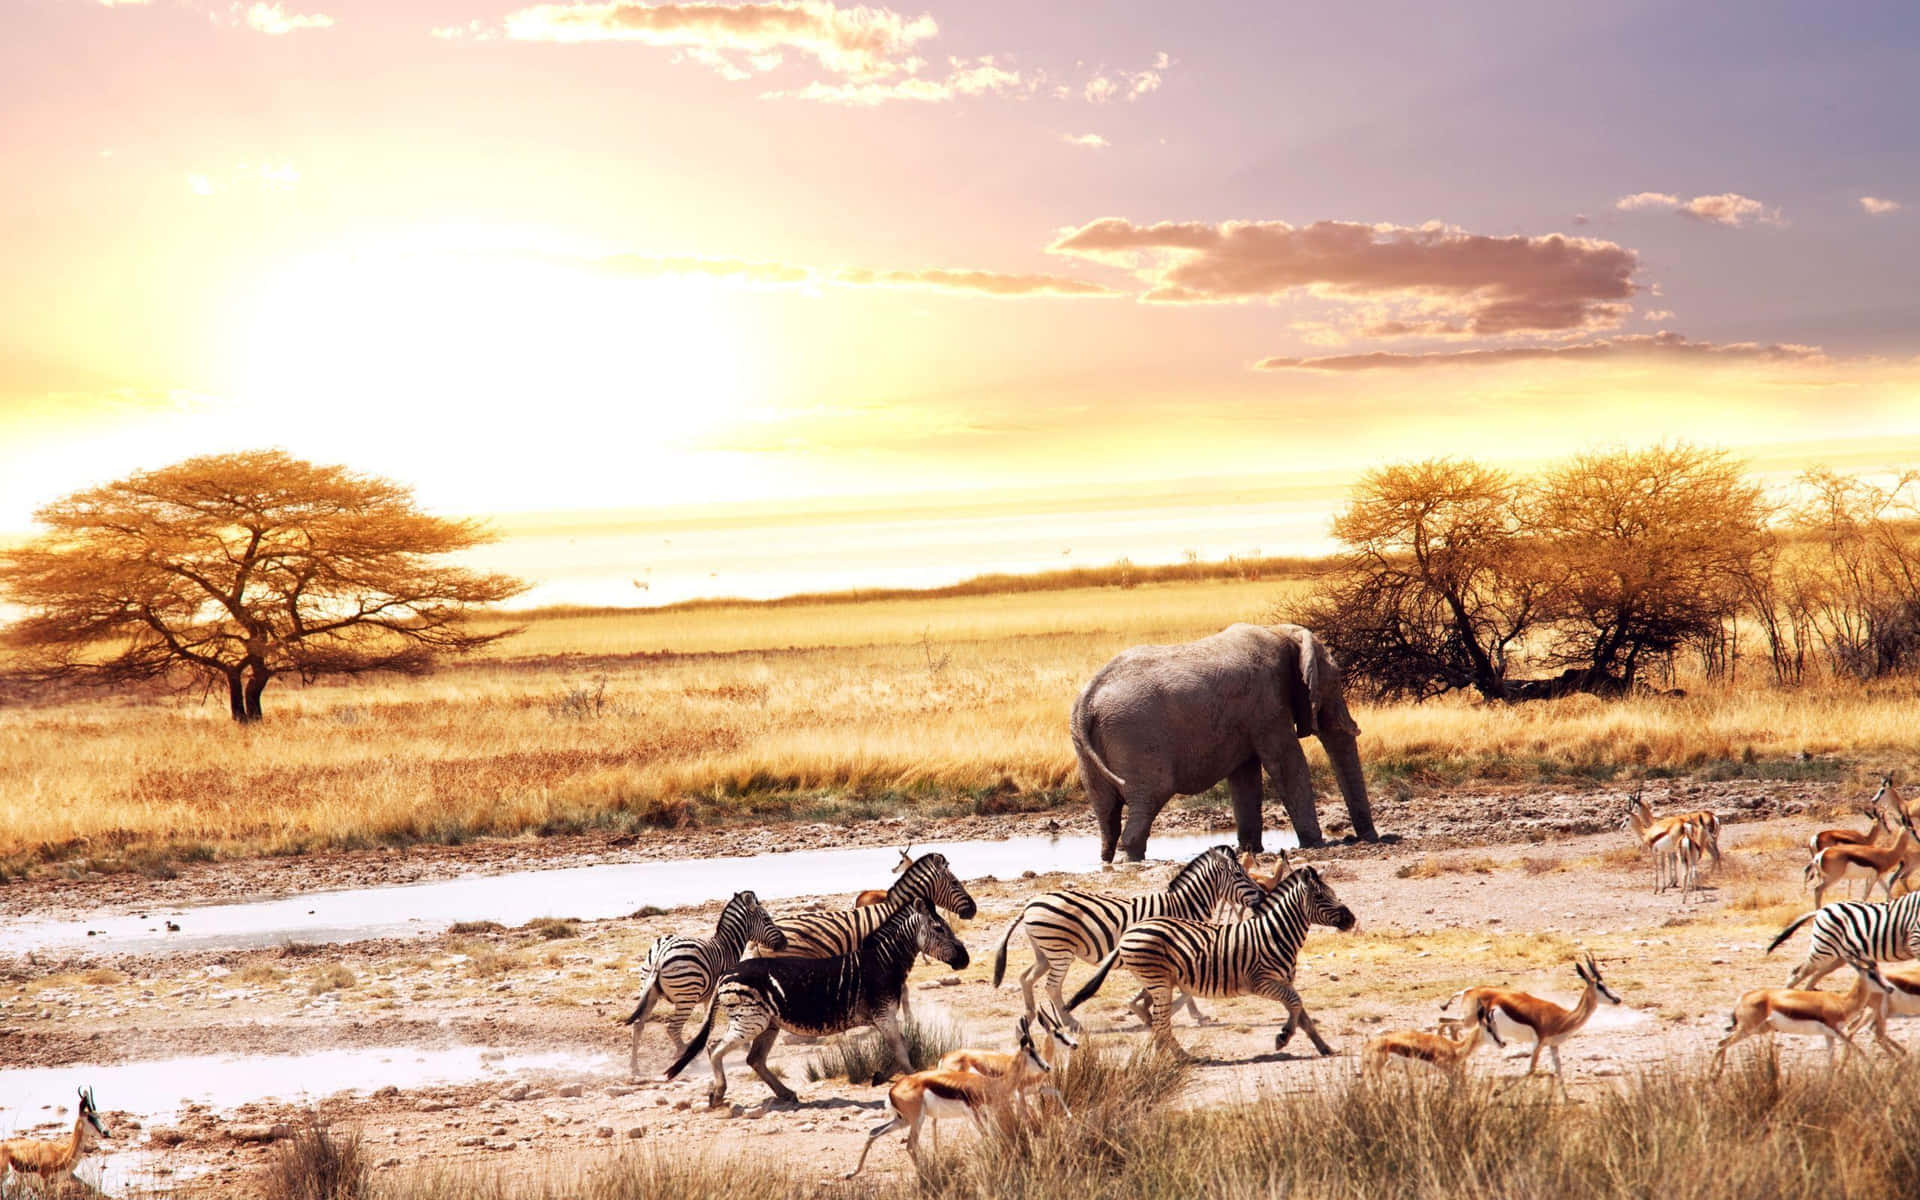 The Serengeti's majestic beauty under the African sky Wallpaper